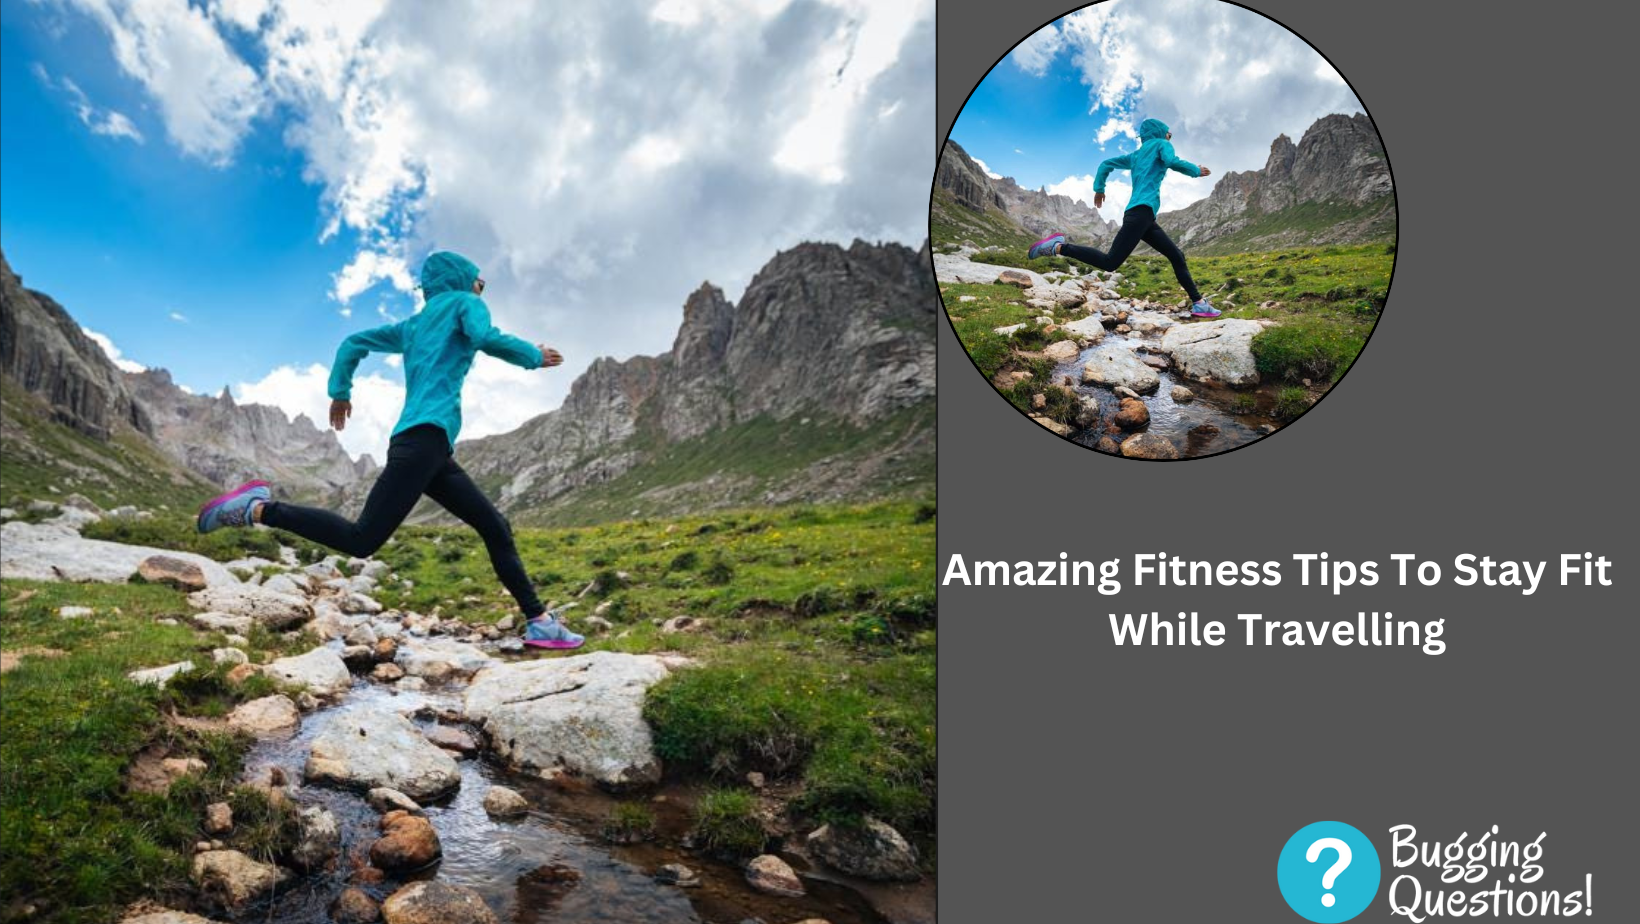 Amazing Fitness Tips To Stay Fit While Travelling